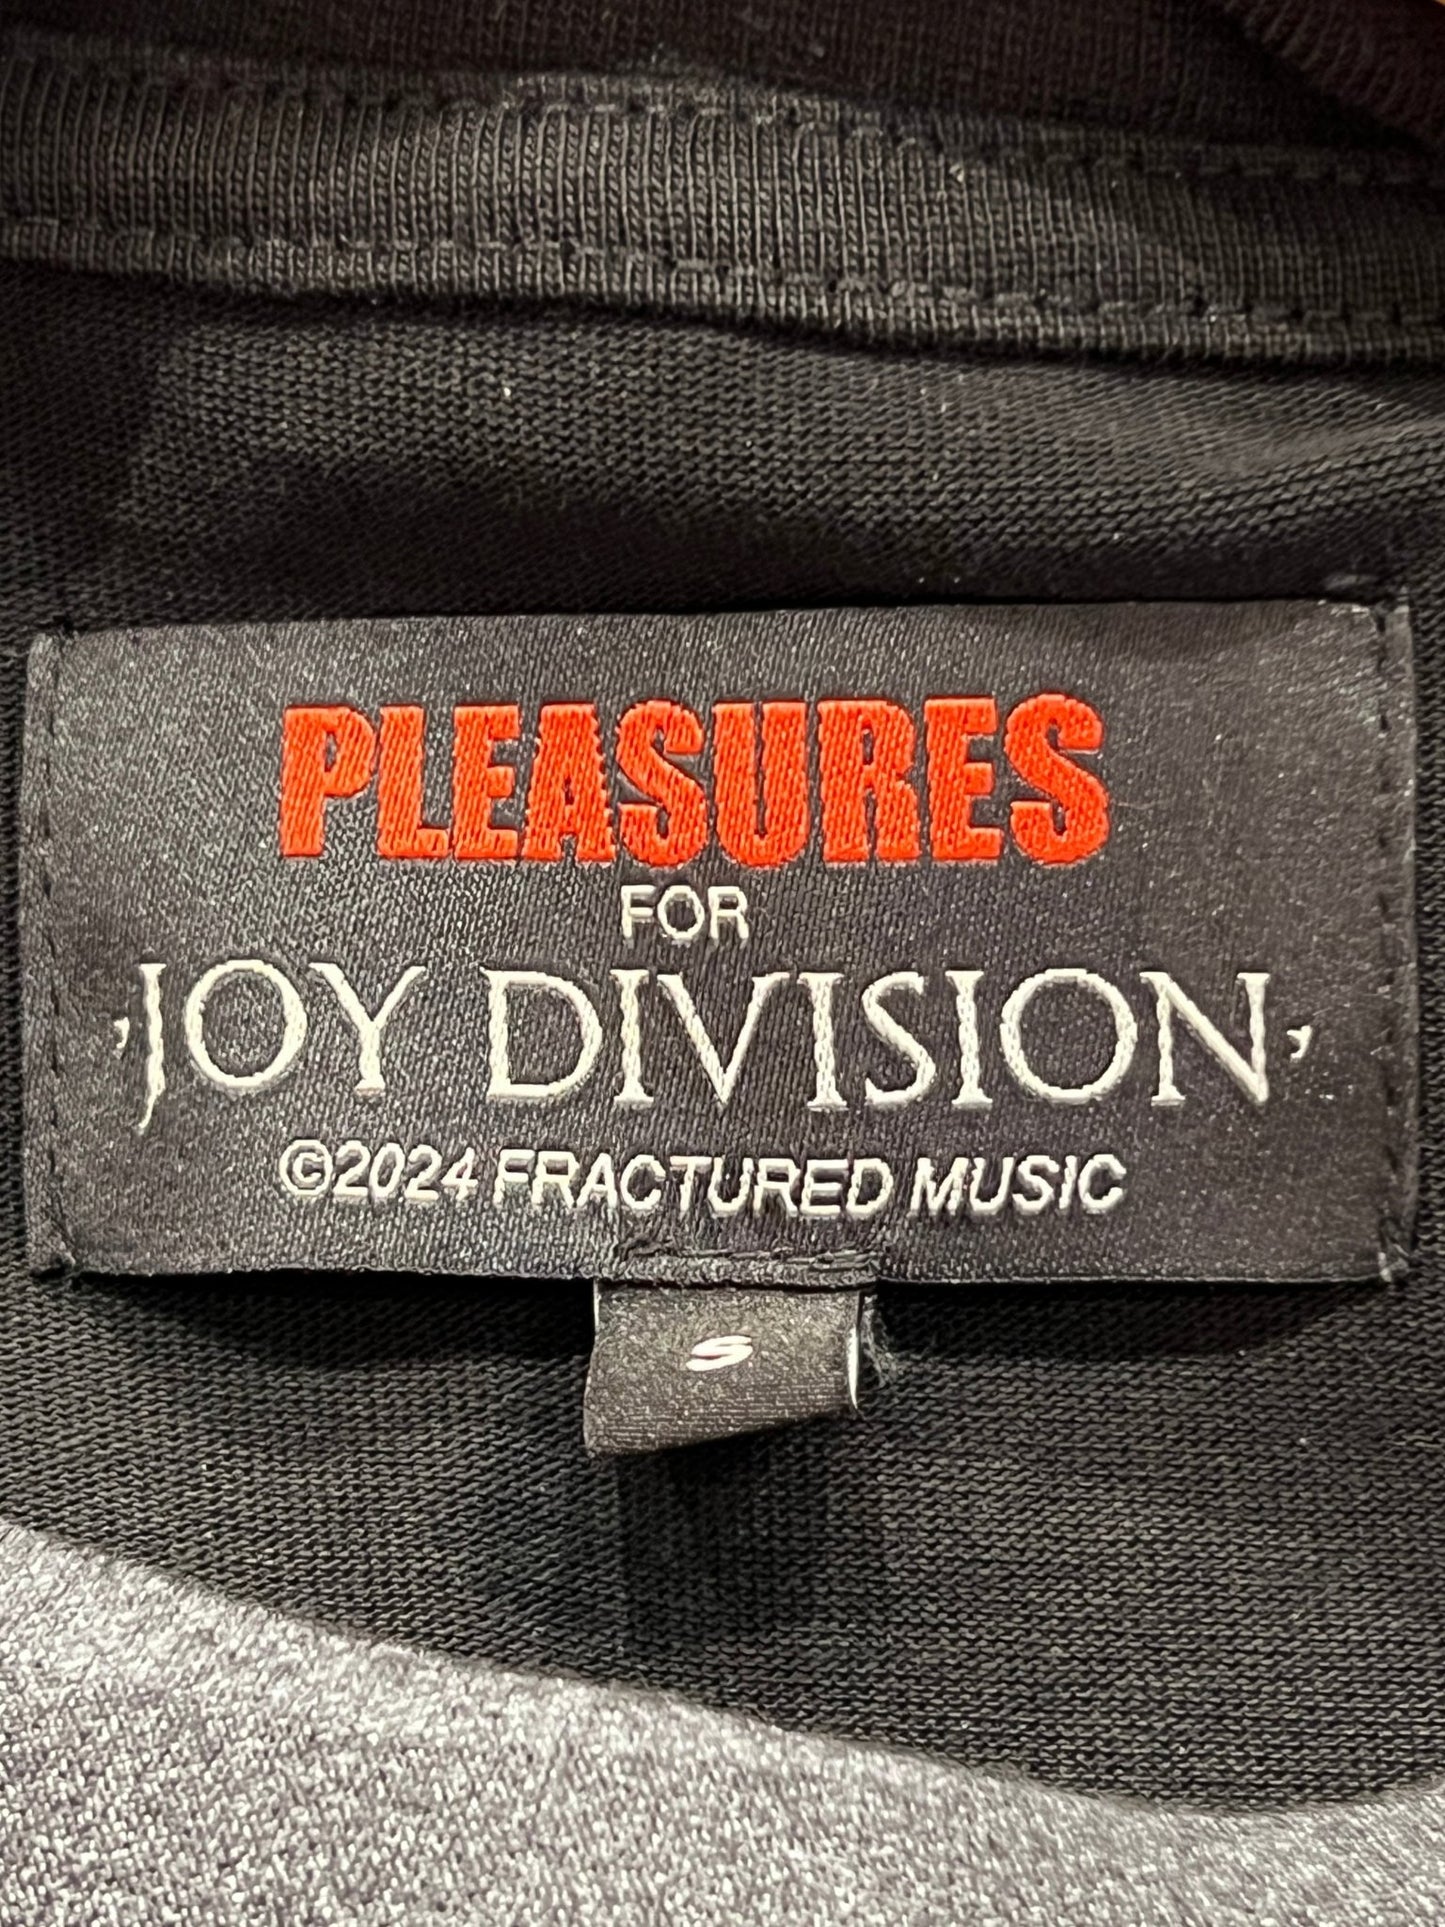 Official collaboration Black cotton jersey PLEASURES ATROCITY TEE BLK clothing label with the text "pleasures for joy division ©2024 fractured music" in white and red font.